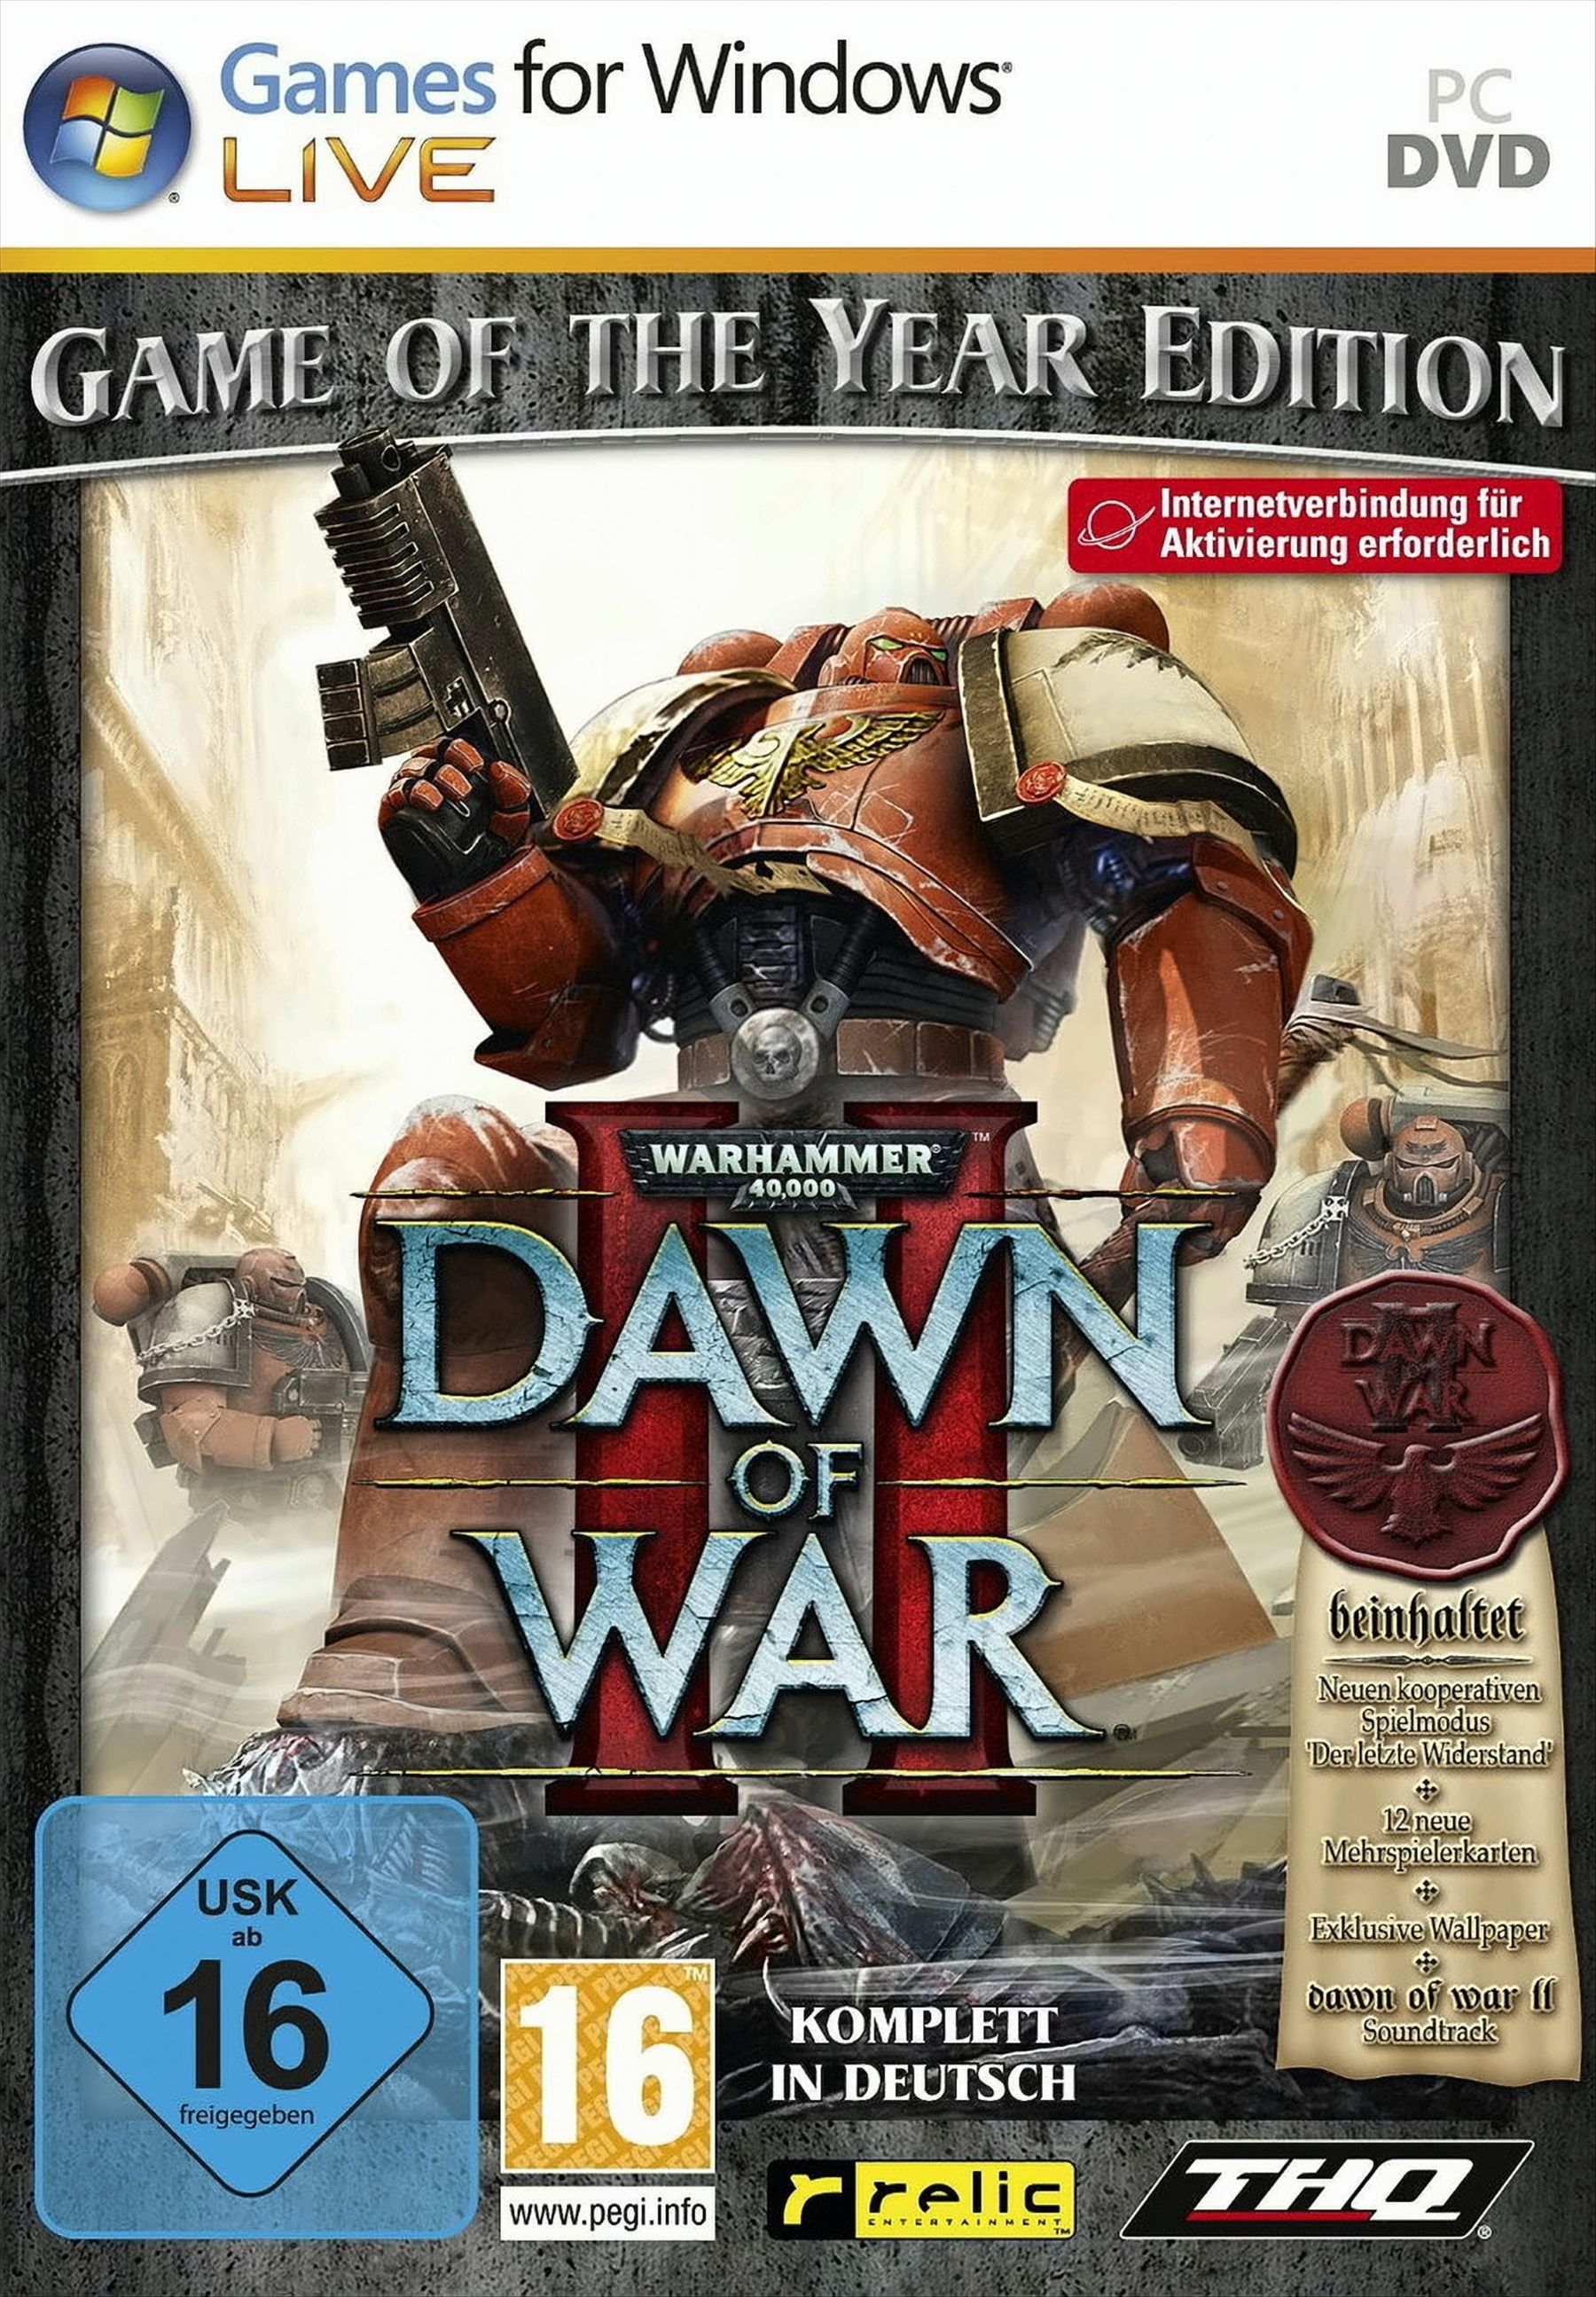 Warhammer 40,000: Dawn of War - the of Game Year II [PC] - Edition